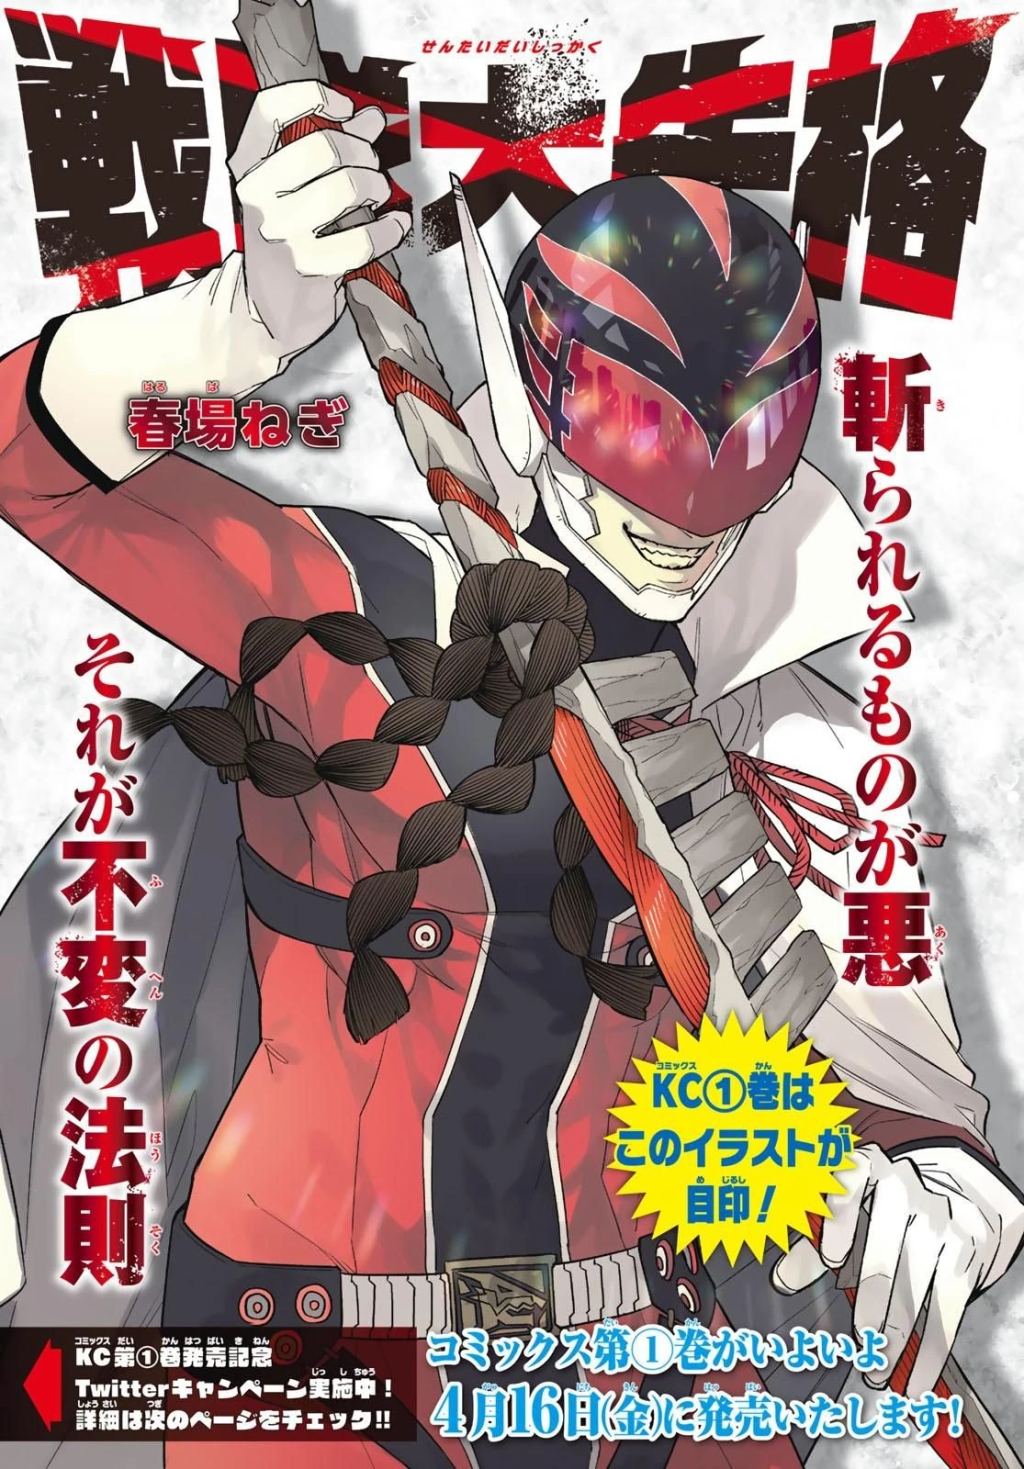 Red Dragon Keeper draws his Divine Tool on Negi Haruba's cover to Ranger Reject Ch. 10 "The Power of One's Feelings" (2021), Kodansha